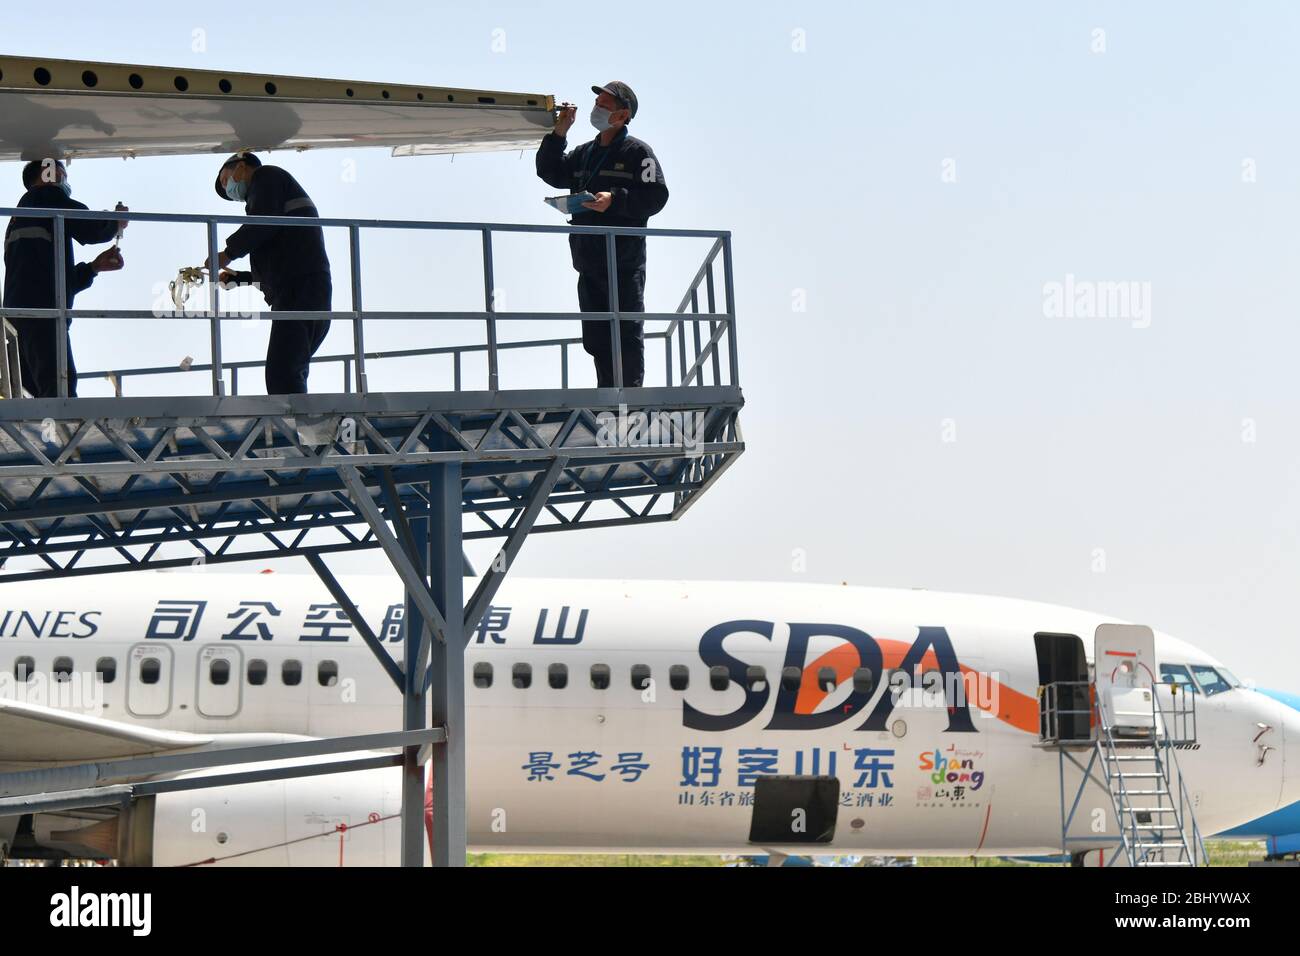 (200428) -- JINAN, April 28, 2020 (Xinhua) -- Technicians refit an airliner at Taikoo (Shandong) Aircraft Engineering Company Limited (STAECO) in Jinan, east China's Shandong Province, April 27, 2020.  The COVID-19 pandemic has led to a significant decrease in airline travel and passenger revenue. Since its production recovered on Feb. 10, STAECO has been offering Passenger-to-Freighter (PTF) solutions for airline operators which need more cargo planes to address this market change. So far, the company has accomplished three PTF conversions for its clients. (Xinhua/Zhu Zheng) Stock Photo